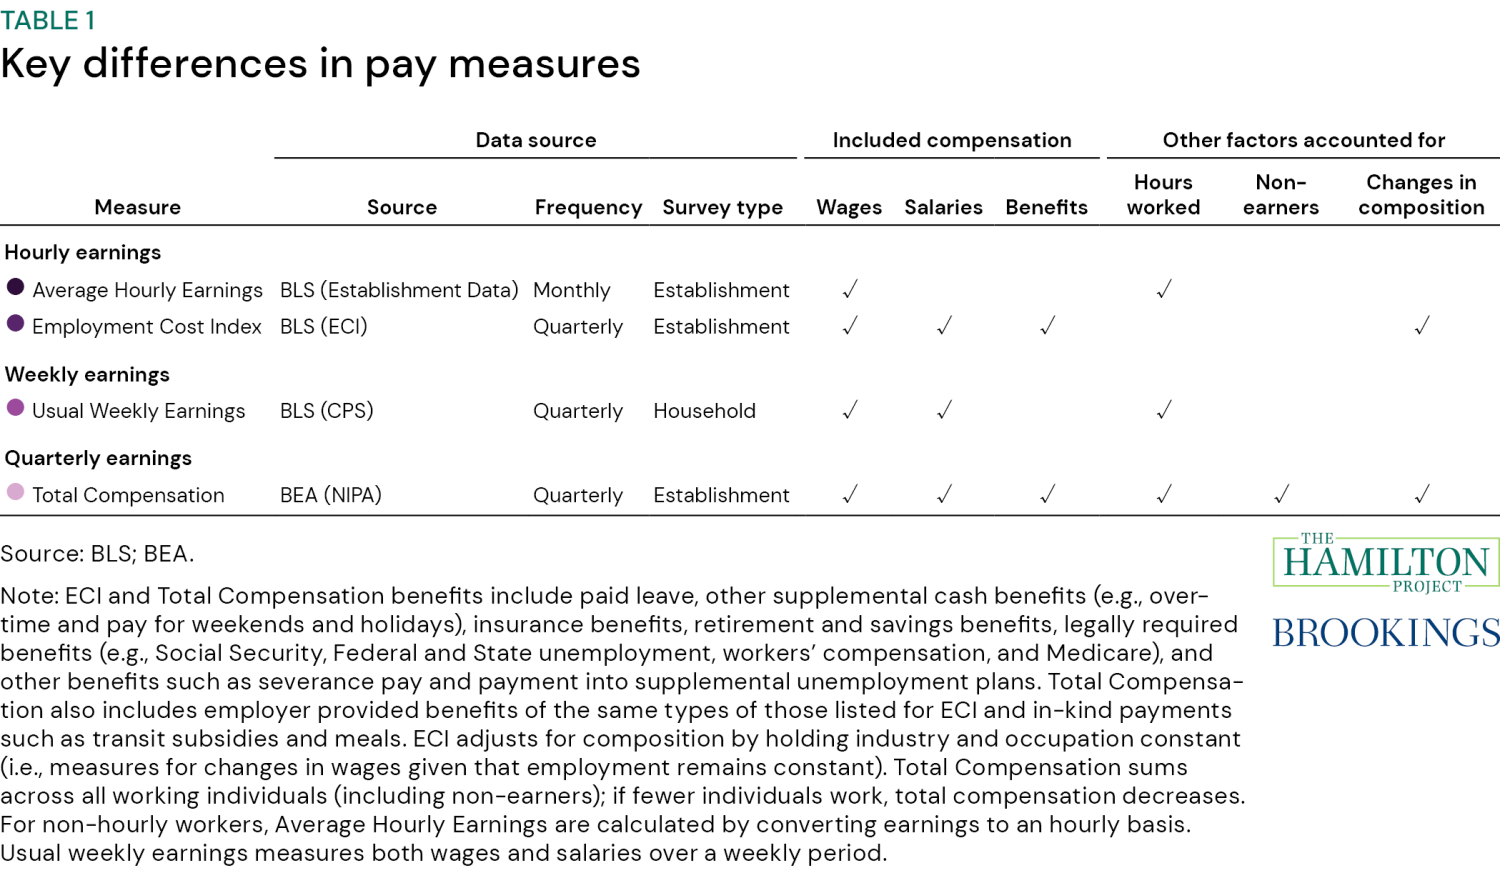 Table 1: Key differences in pay measures, illustrating compensation measures including wages, salary, and benefits